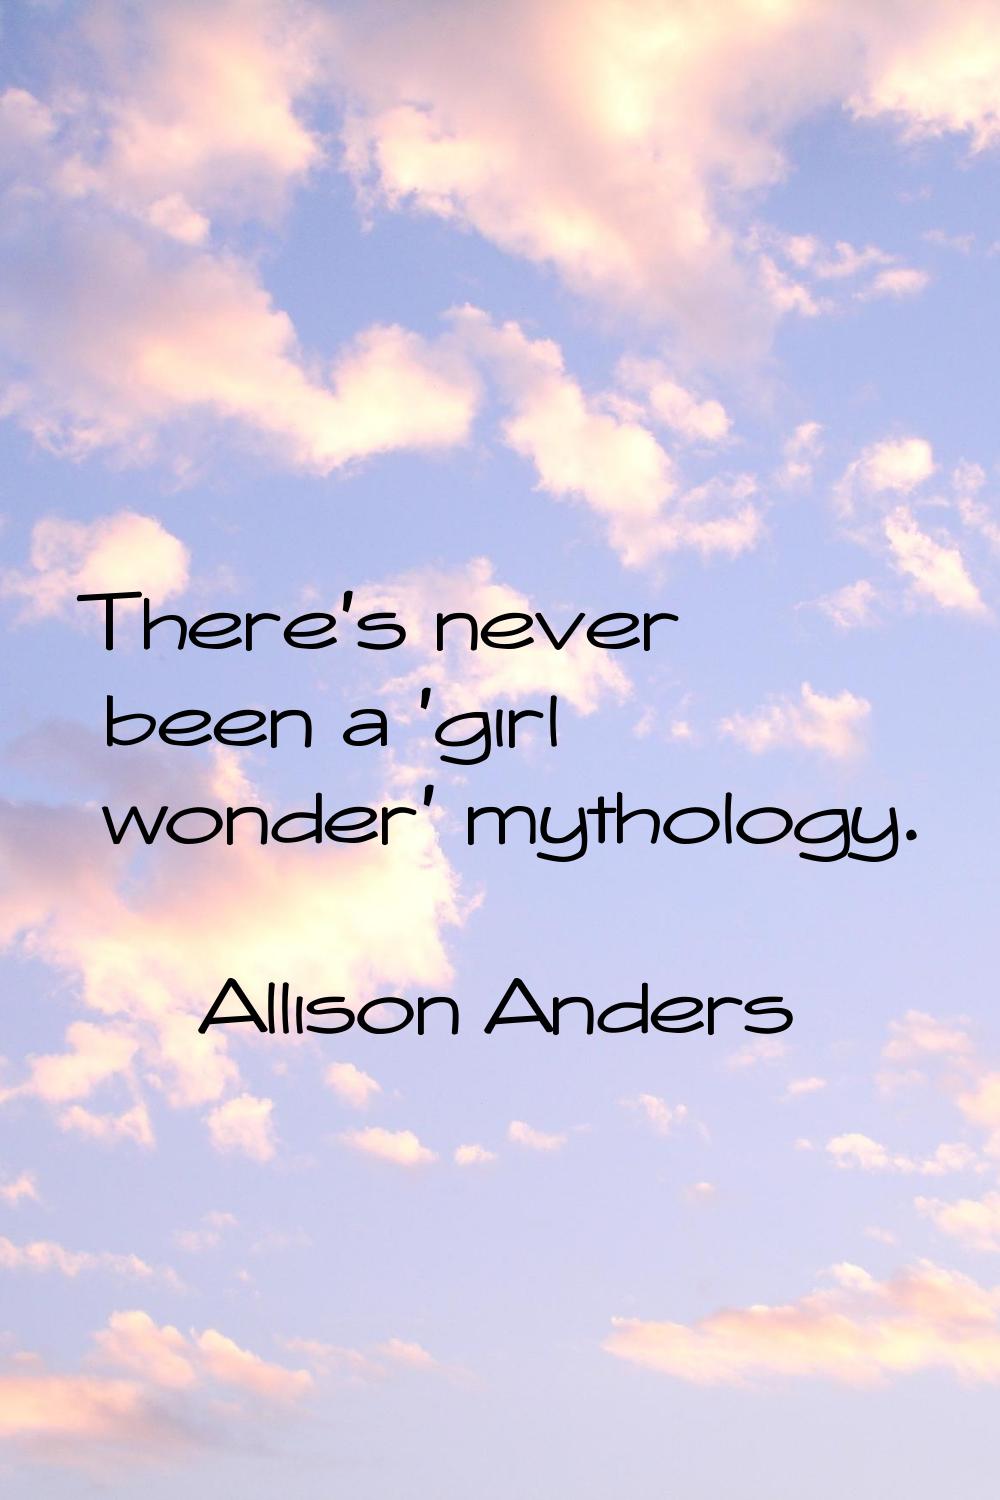 There's never been a 'girl wonder' mythology.